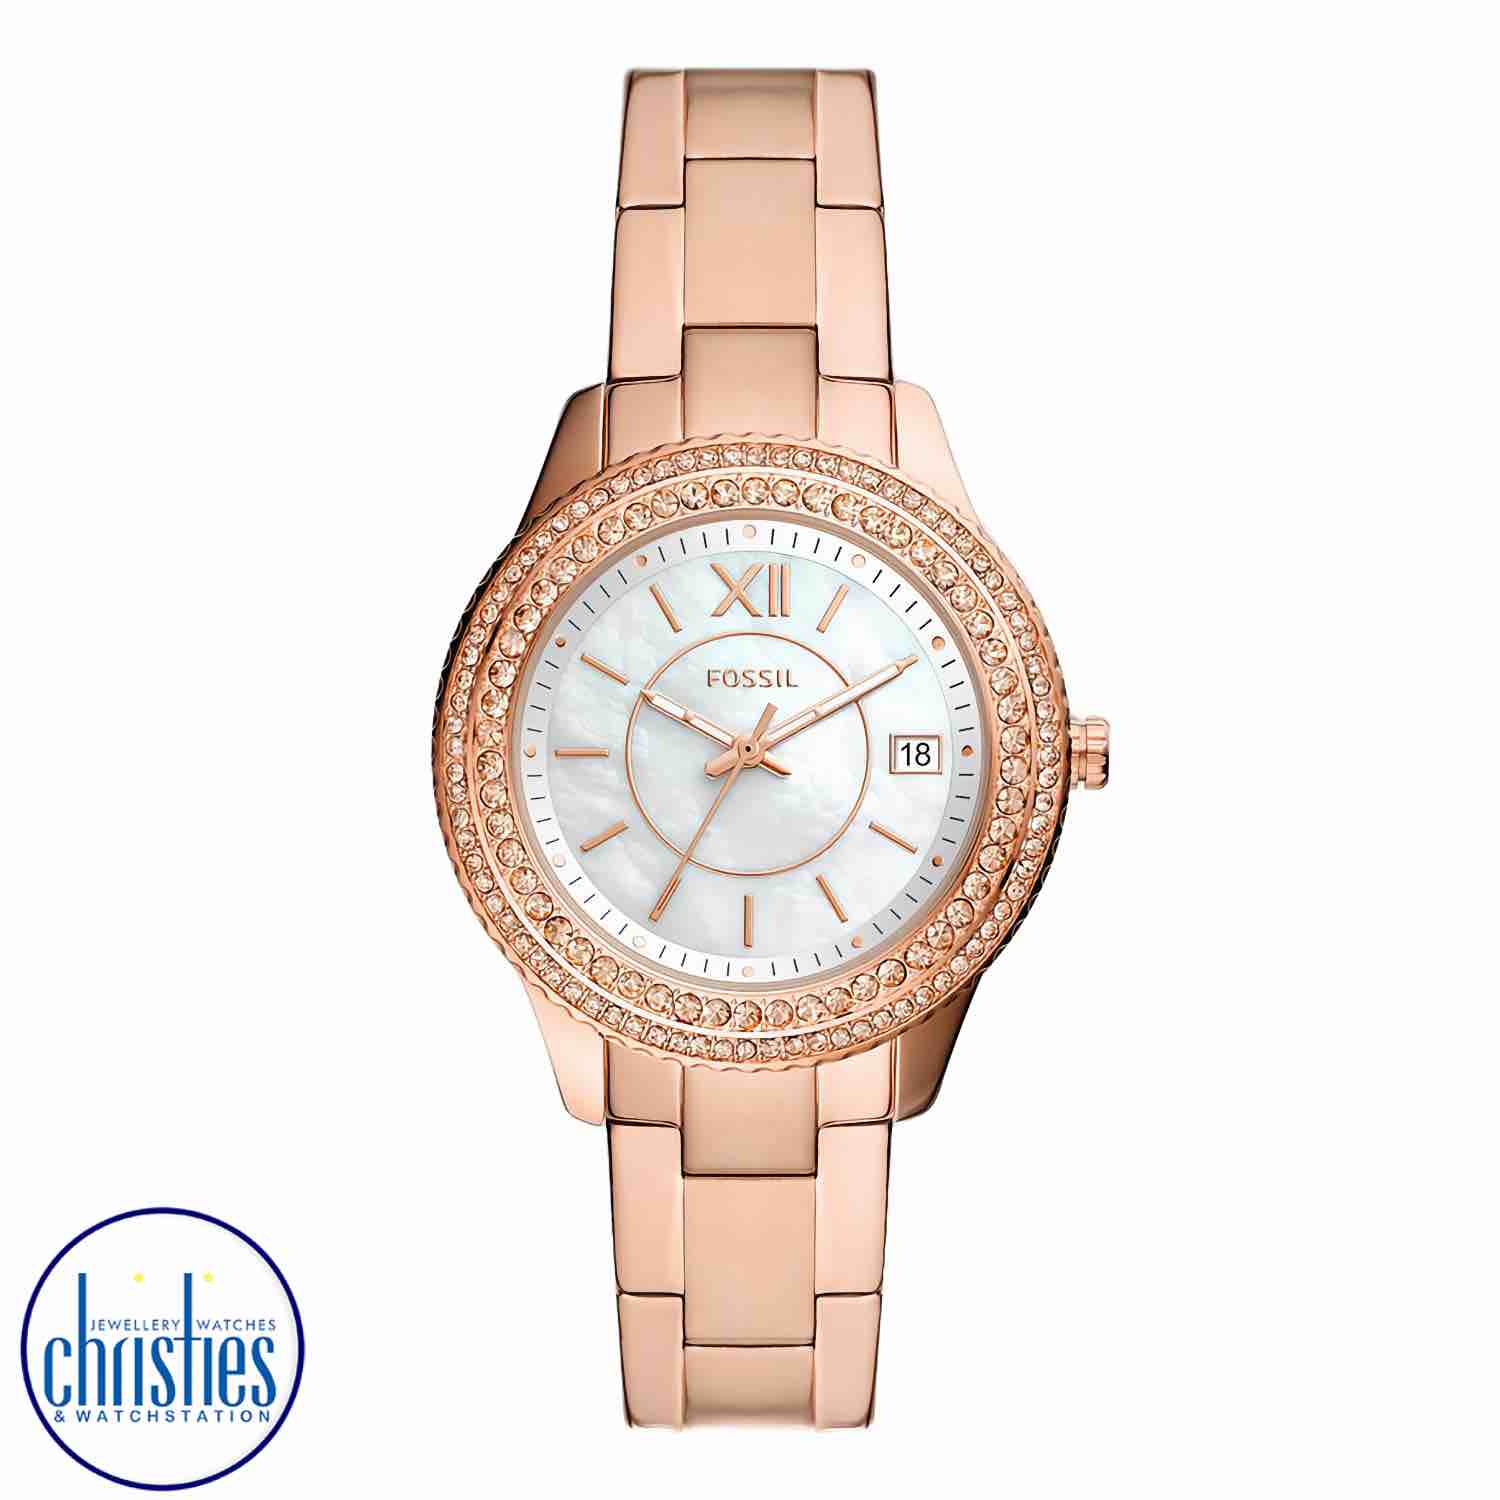 ES5131 Fossil Stella Rose Gold-Tone Stainless Steel Watch fossil smart watches nz